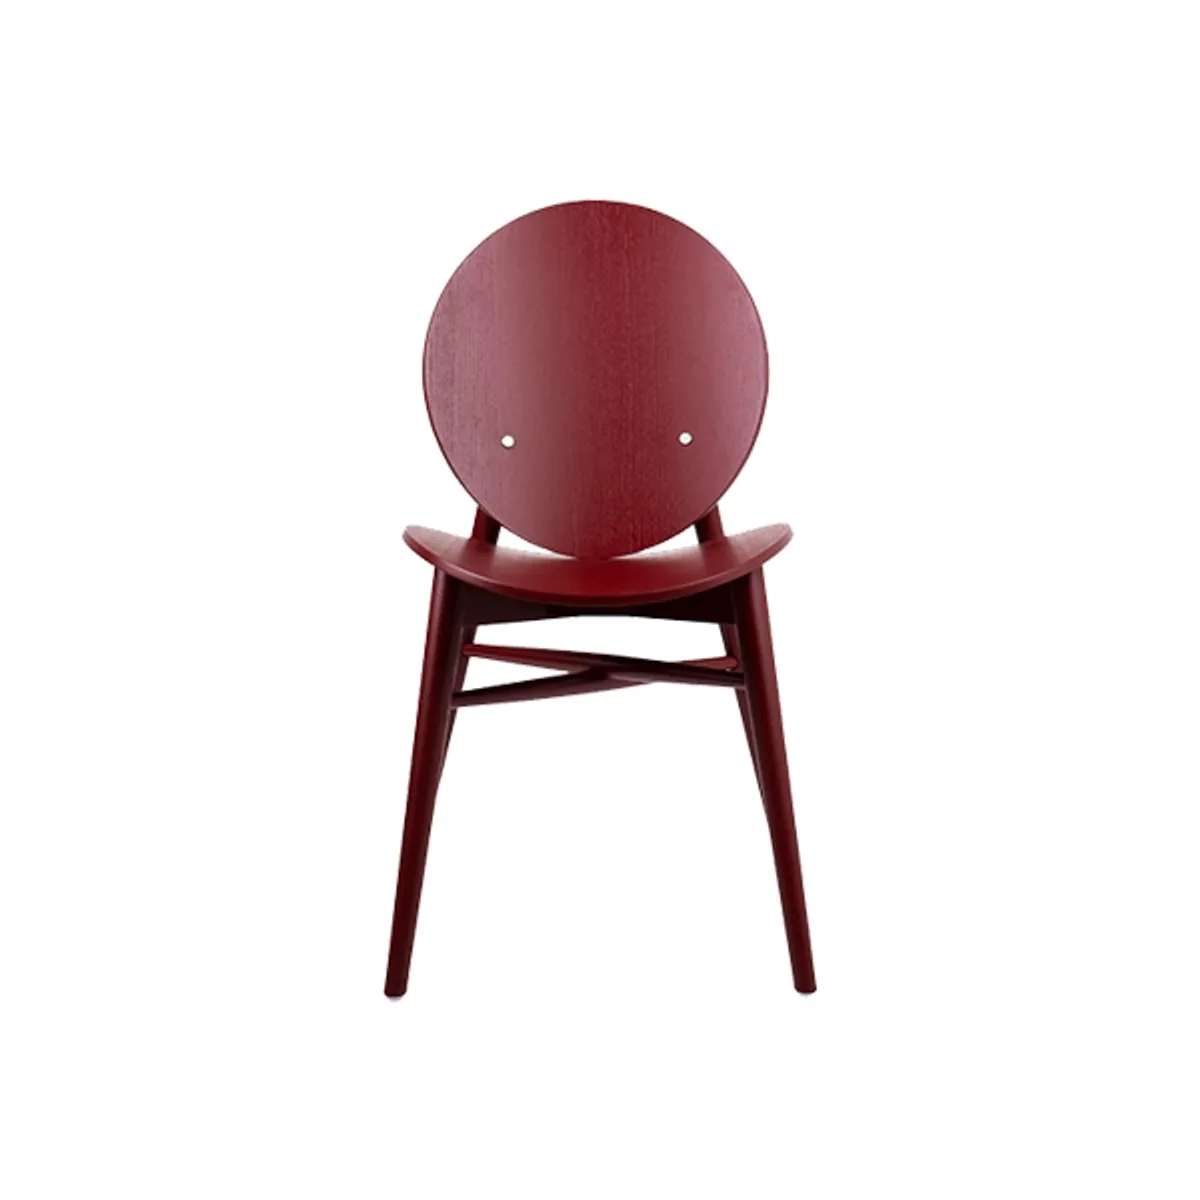 Eder wood chair Inside Out Contracts